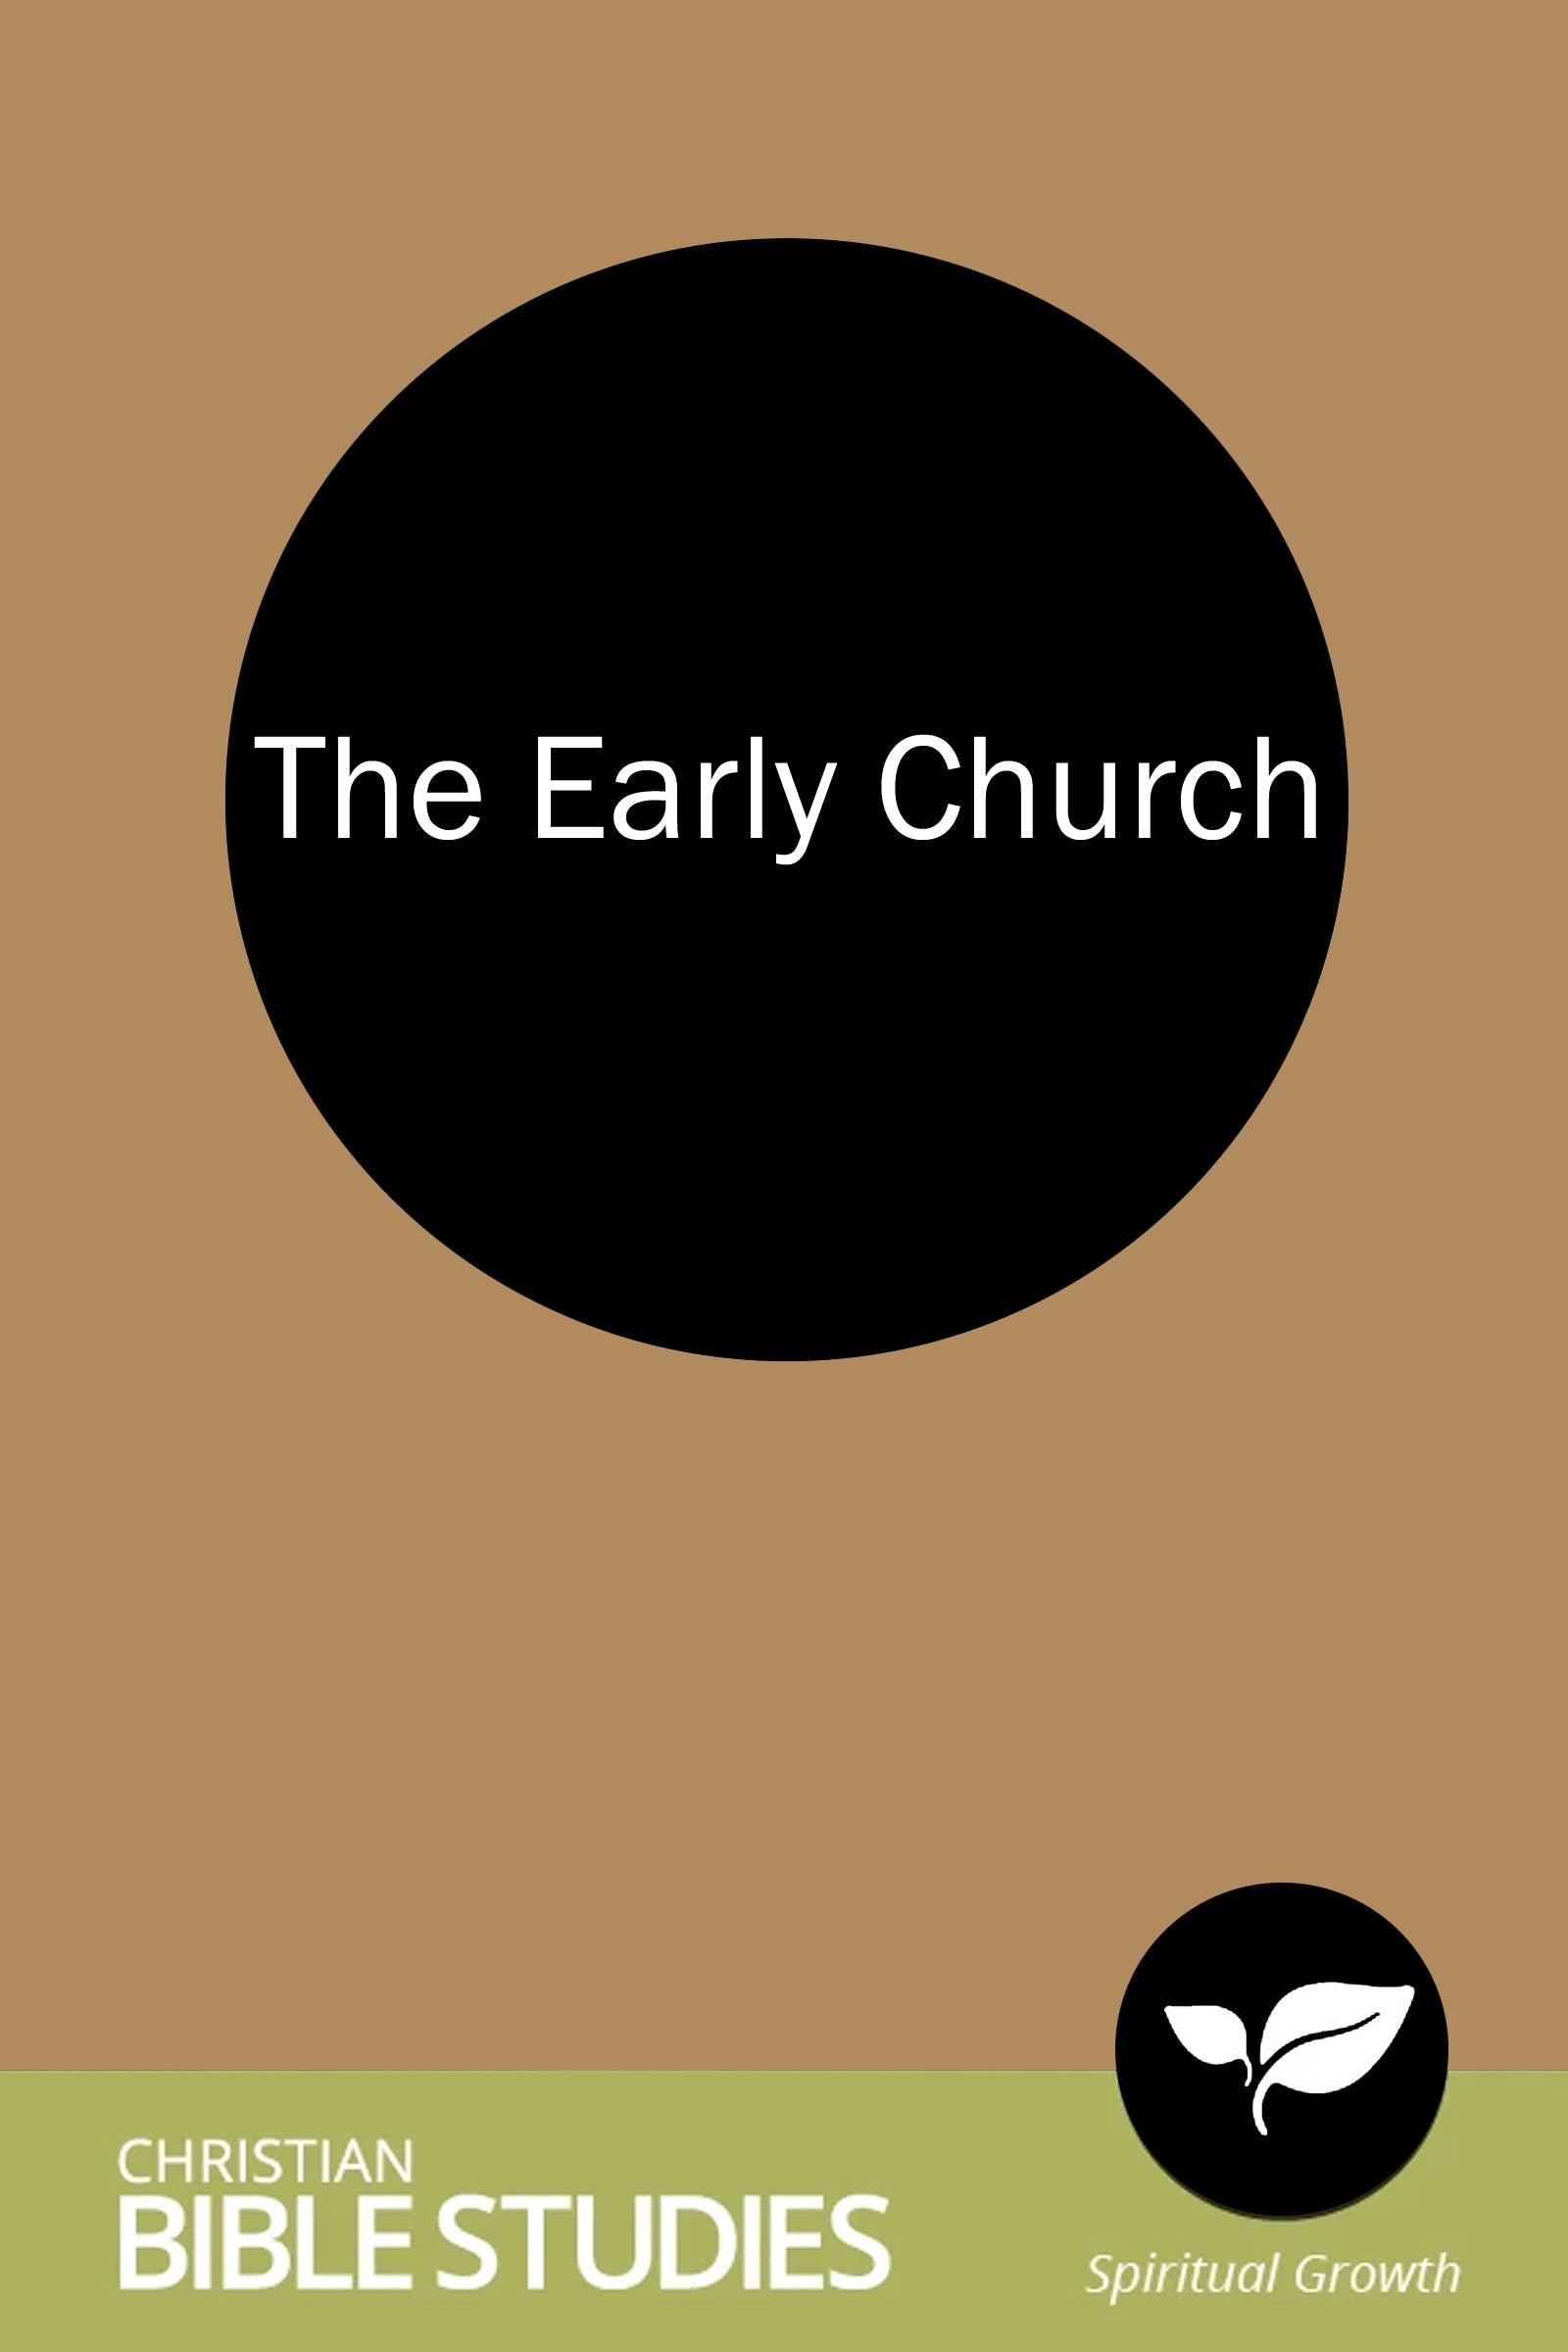 The Early Church